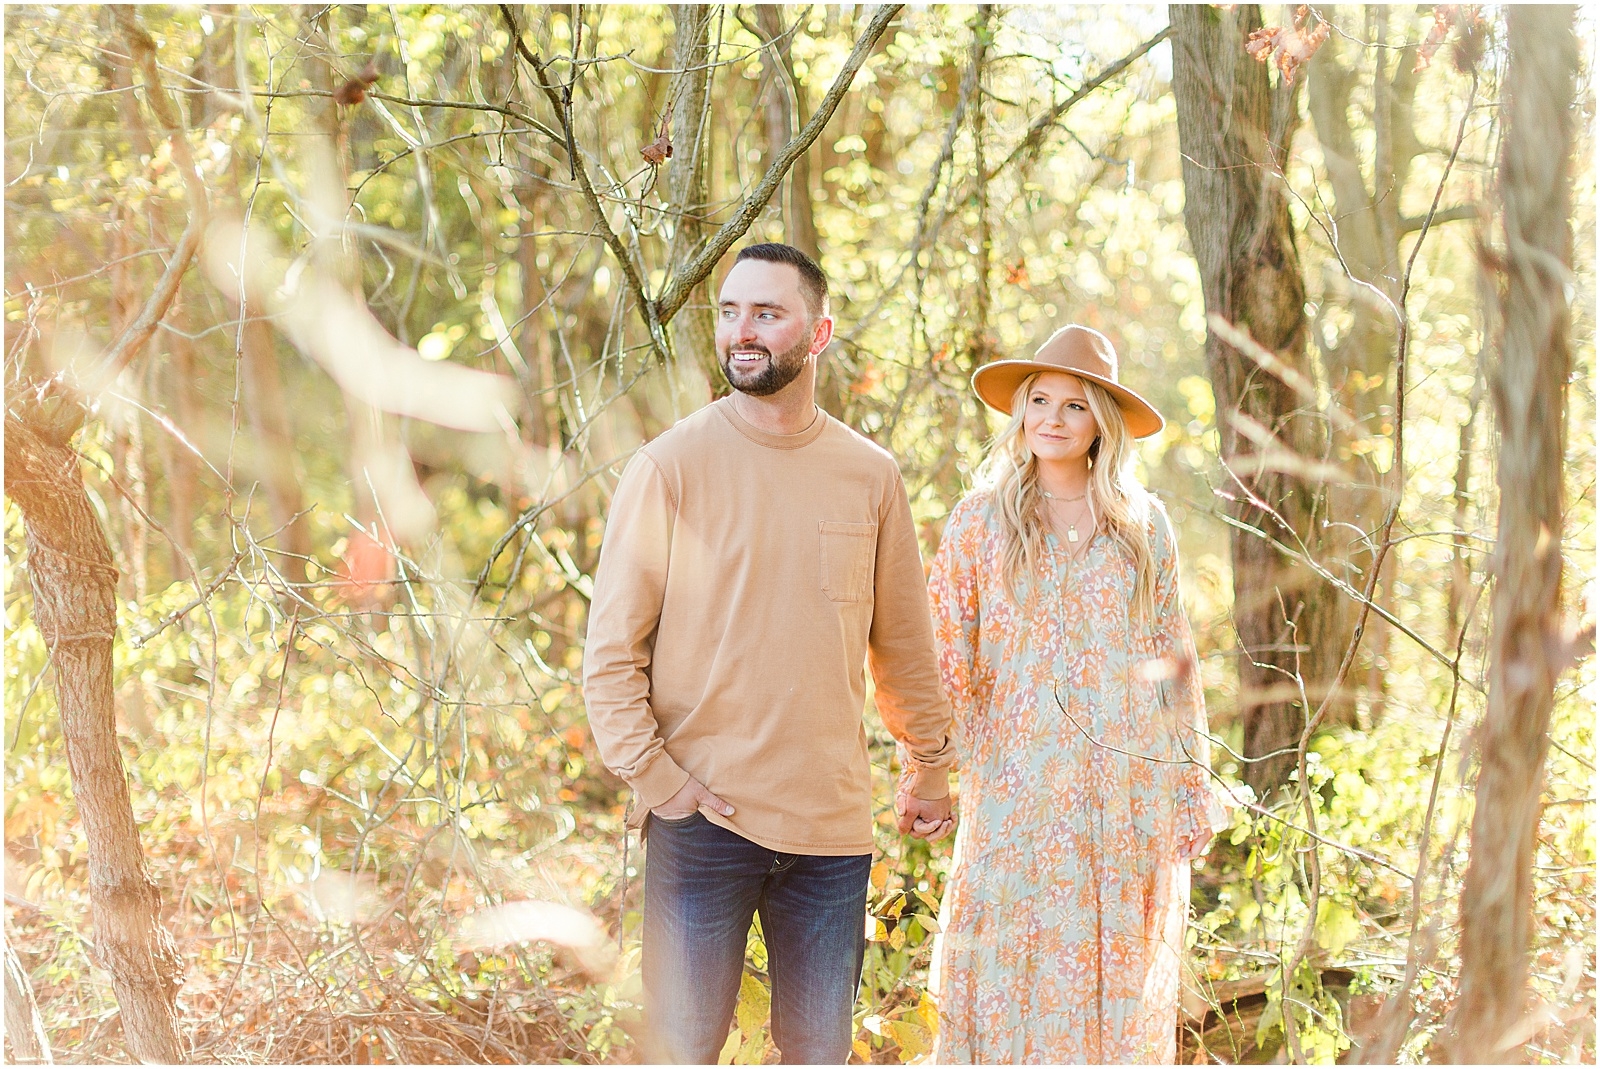 A Southern Indiana Engagement Session | Charleston and Erin | Bret and Brandie Photography015.jpg